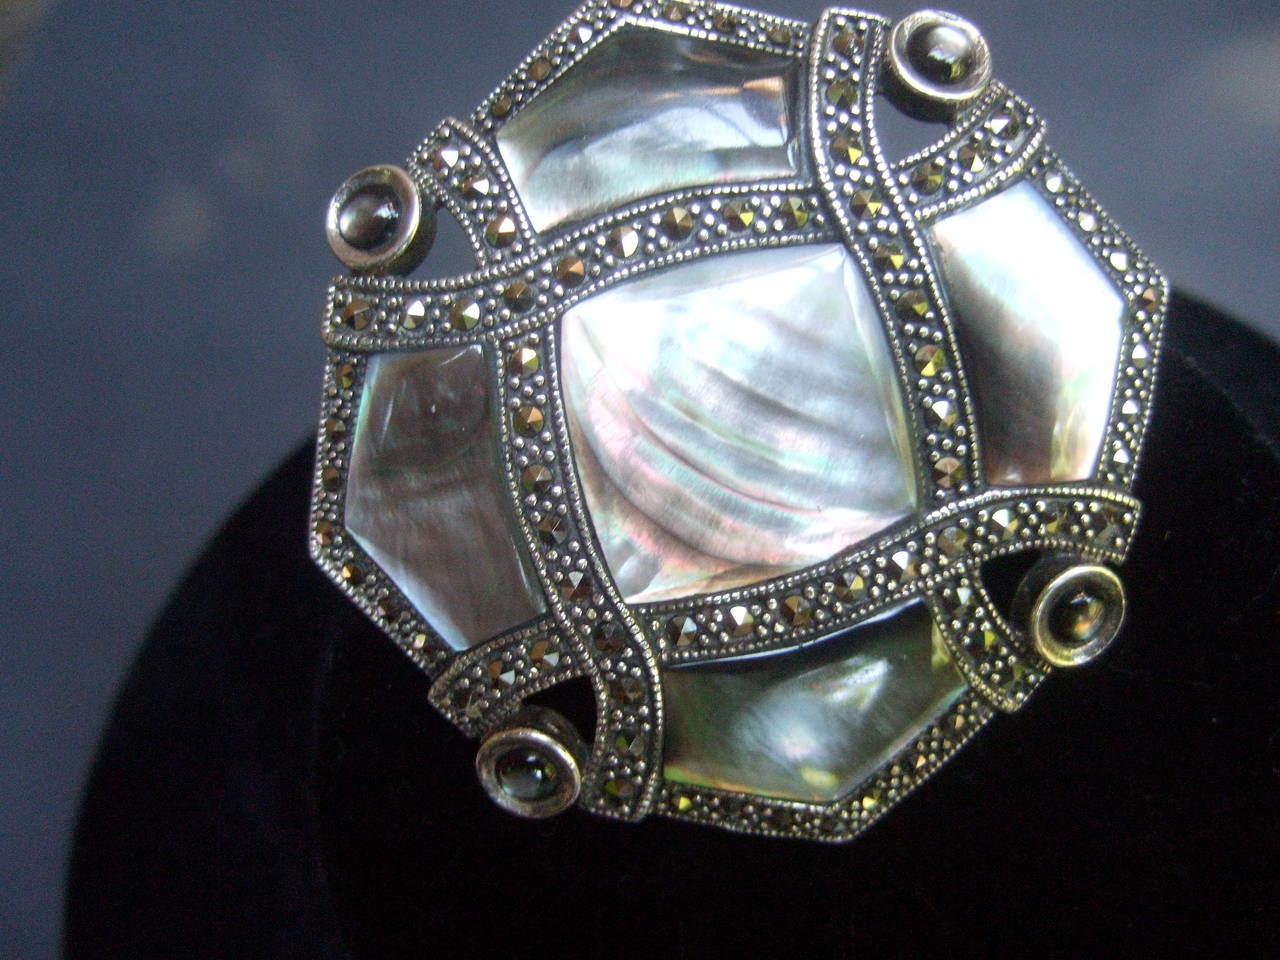 Exquisite mother of pearl sterling marcasite brooch 
The elegant large scale brooch is embellished 
with inlaid tiles of lustrous mother of pearl

The mother of pearl tiles are framed with sinuous 
bands of glittering marcasite crystals. The